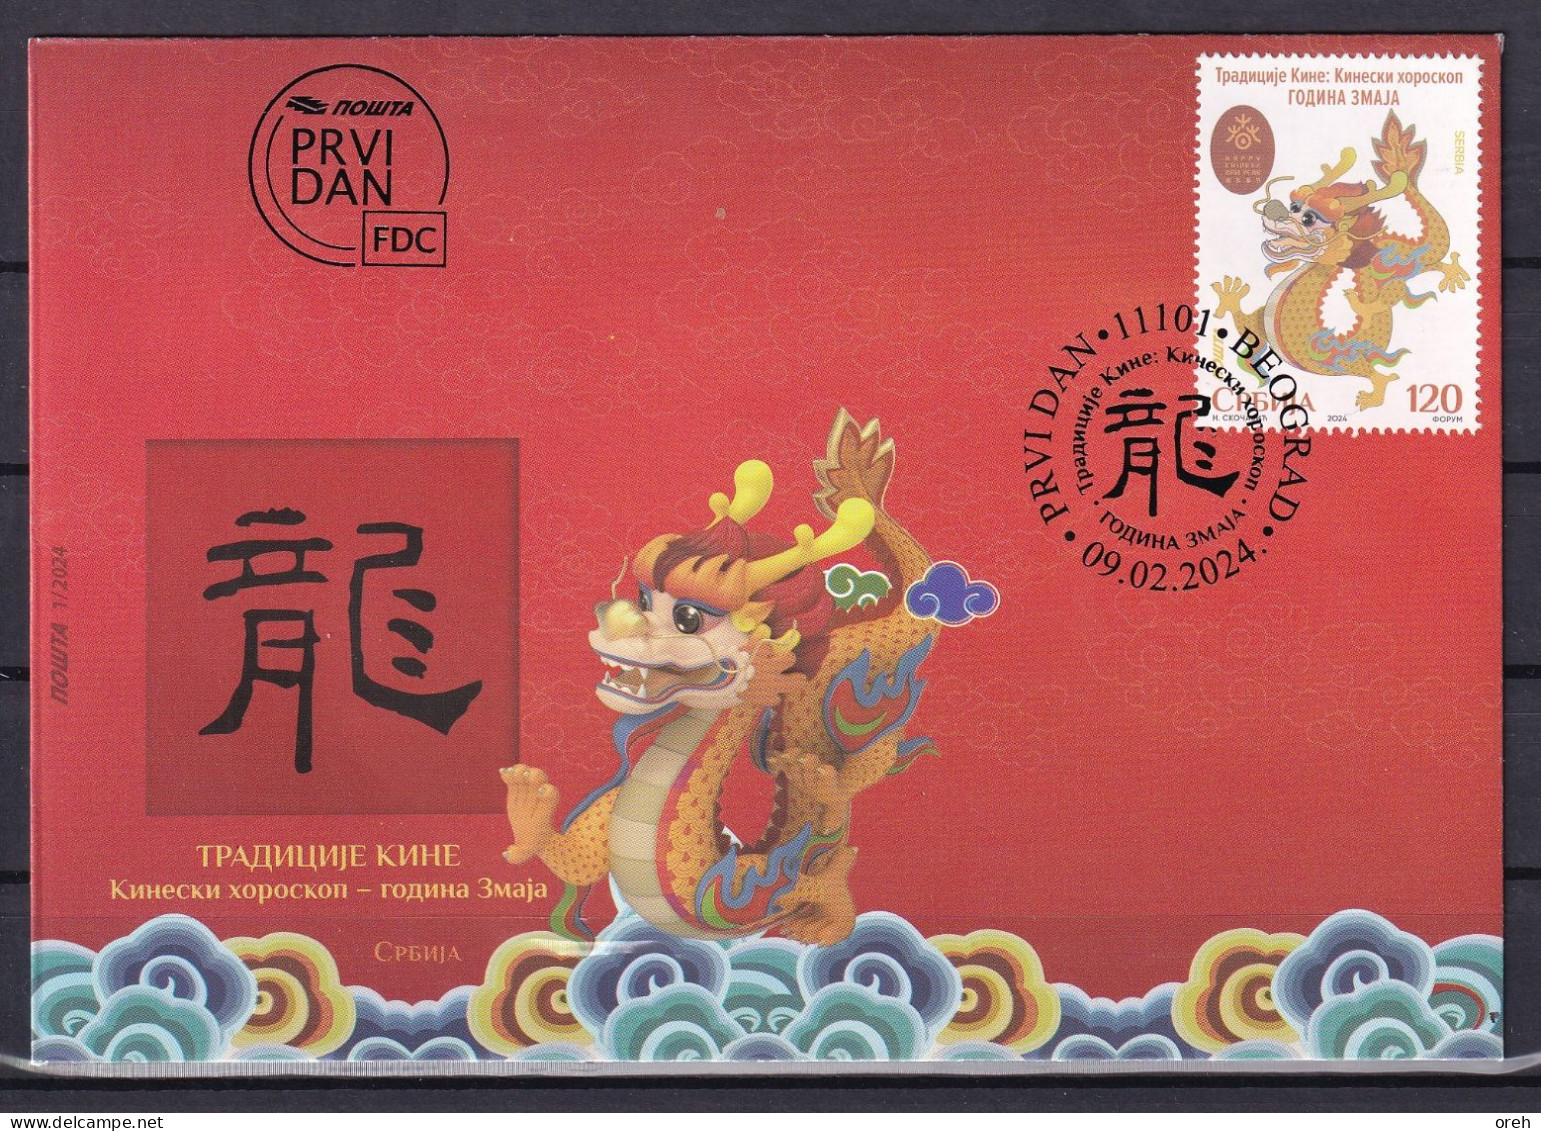 SERBIA 2024,CHINESE LUNAR  NEW YEAR,YEAR  OF THE DRAGON,LOONG,ZODIAK,MNH - Anno Nuovo Cinese